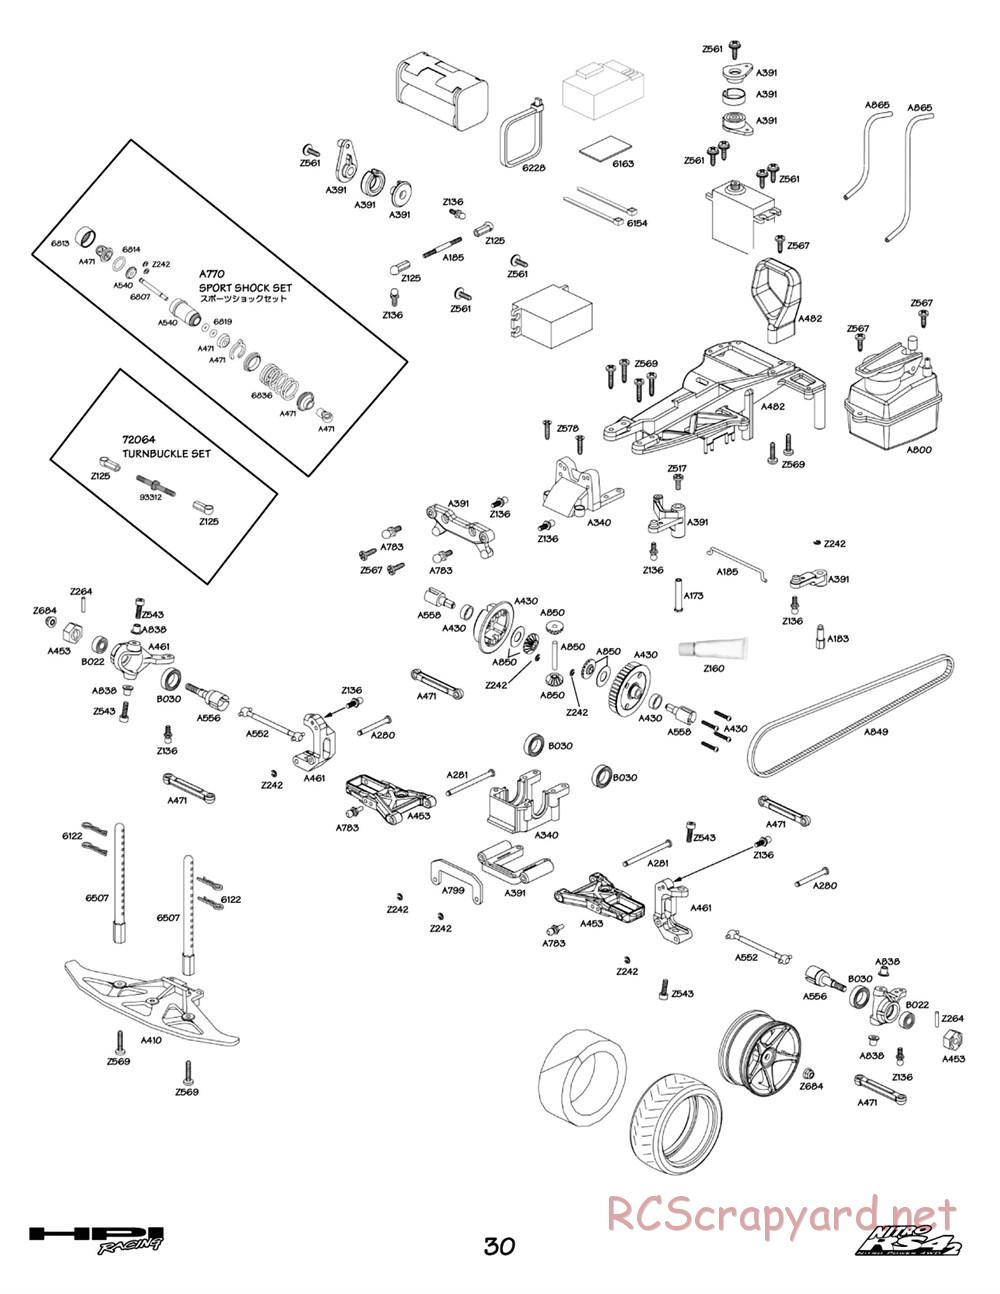 HPI - Nitro RS4-2 - Exploded View - Page 30